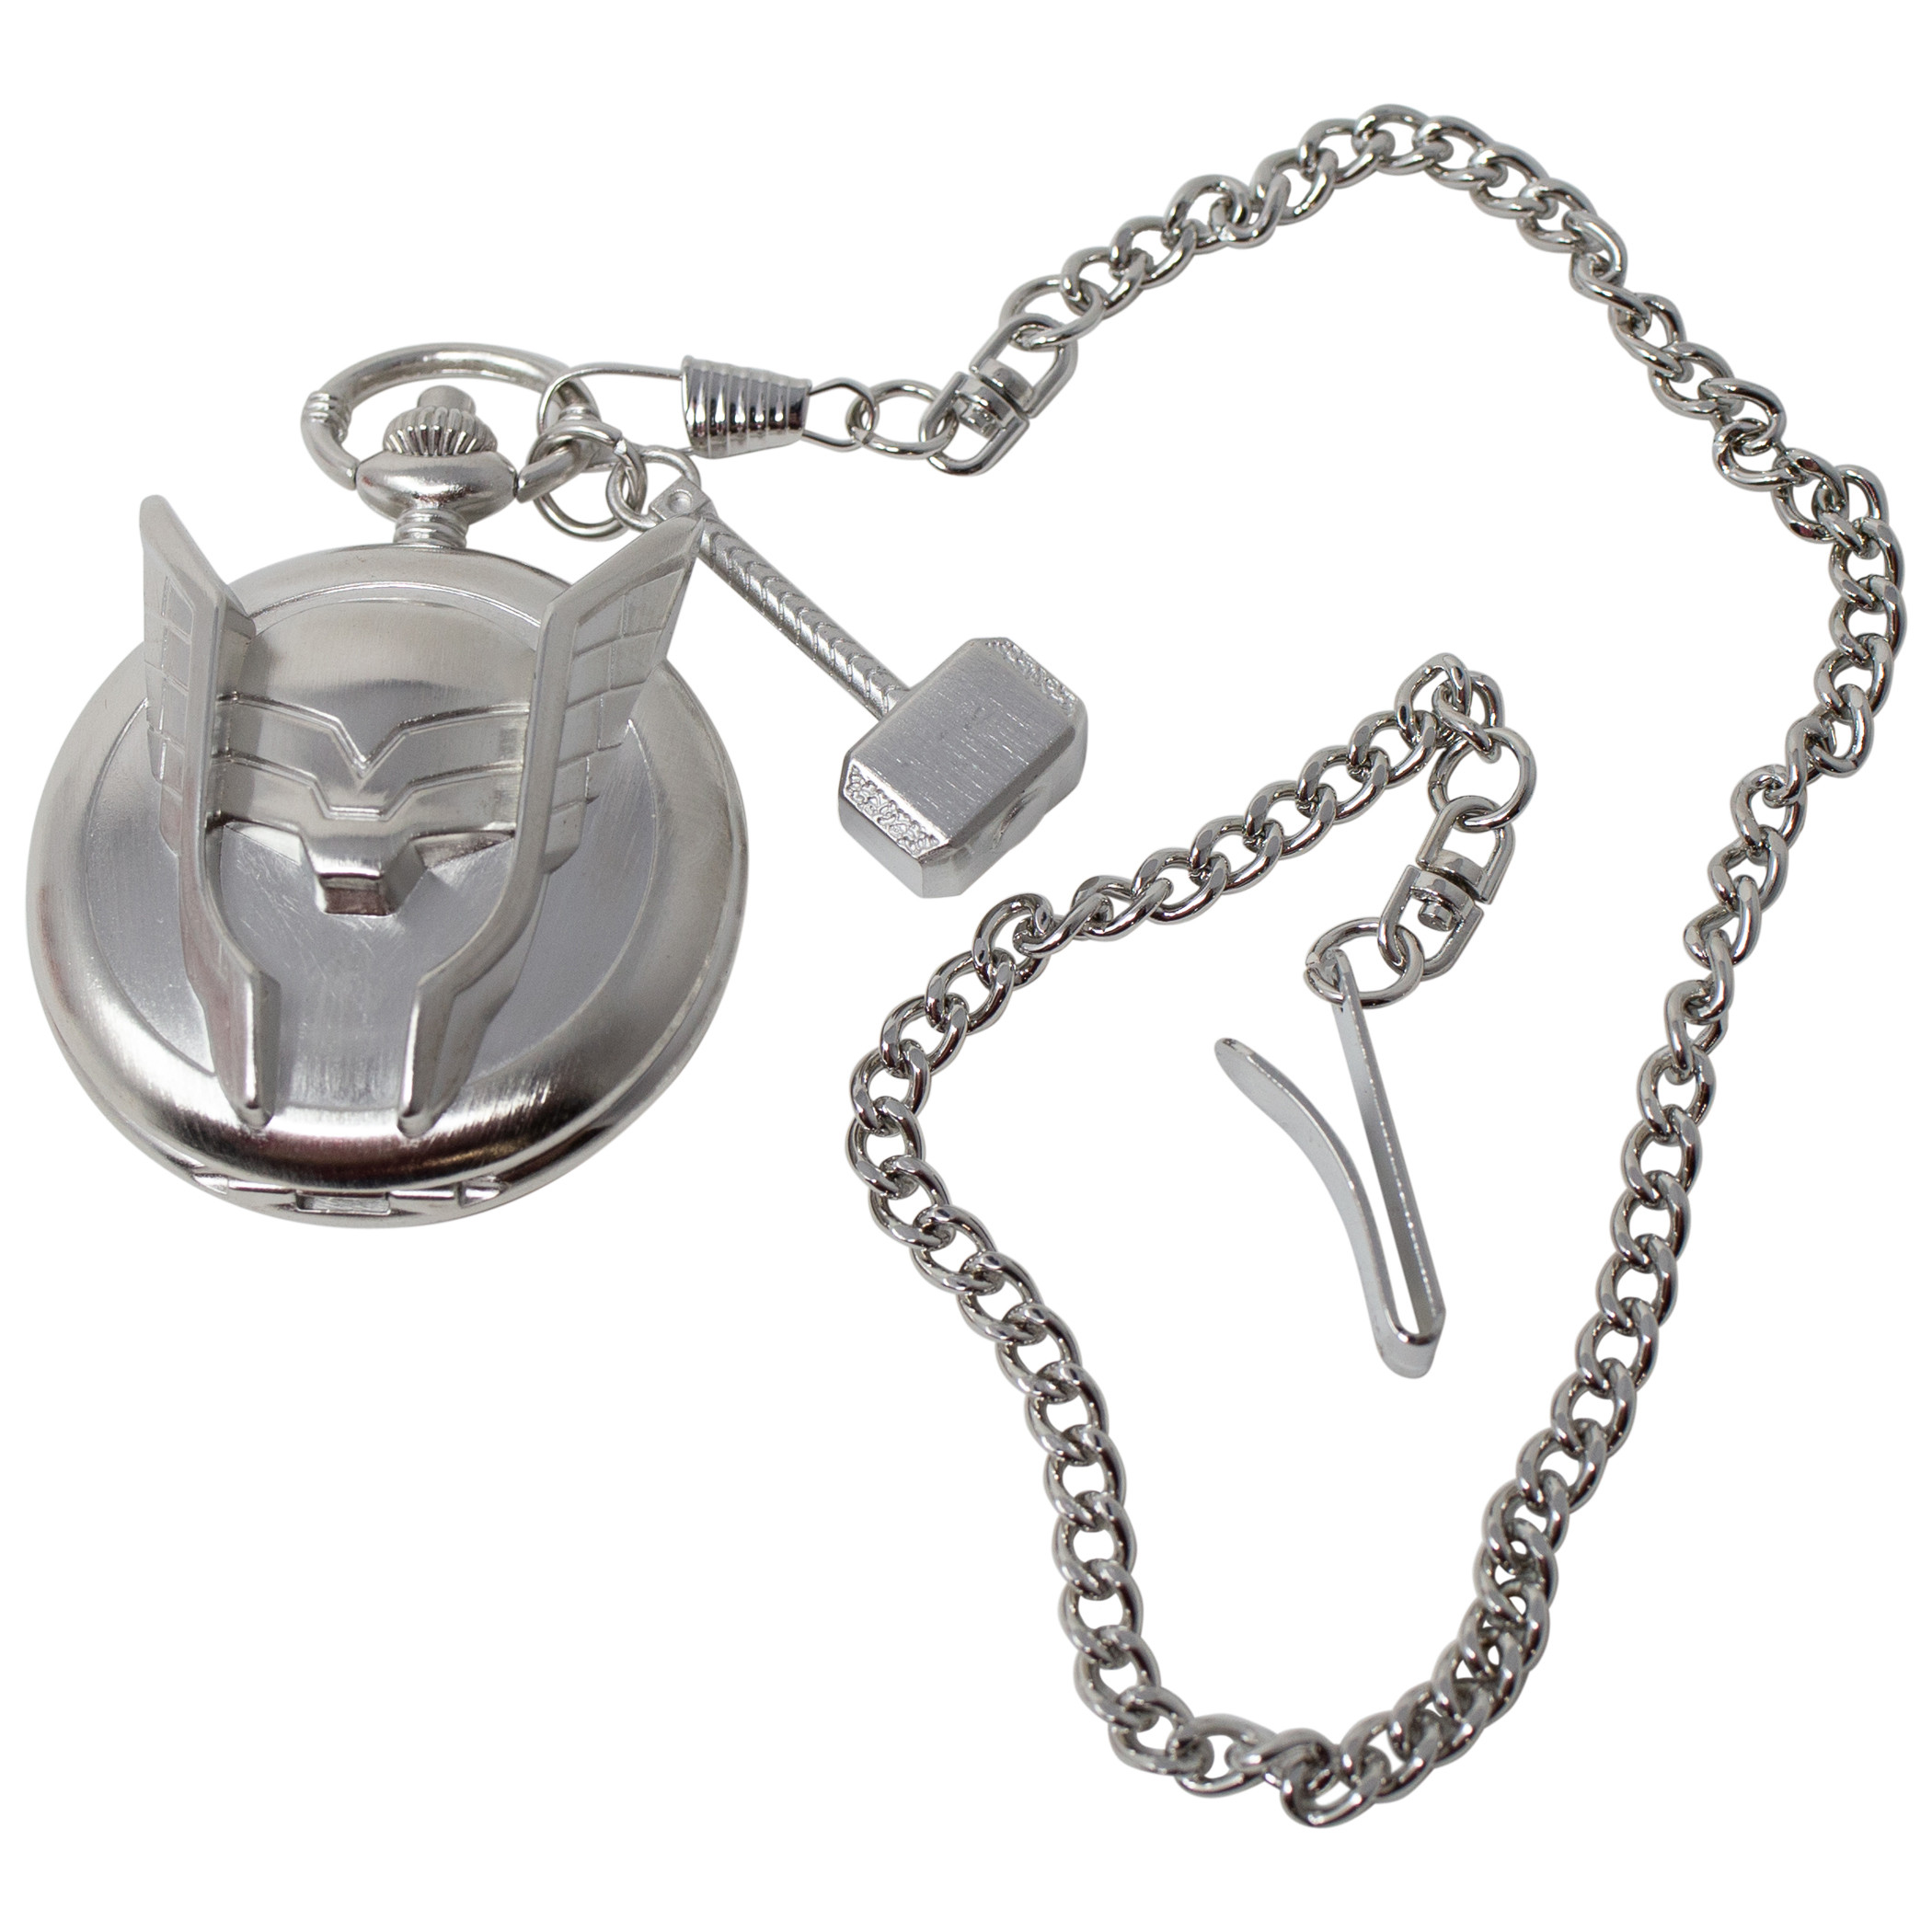 The Mighty Thor Pocket Watch